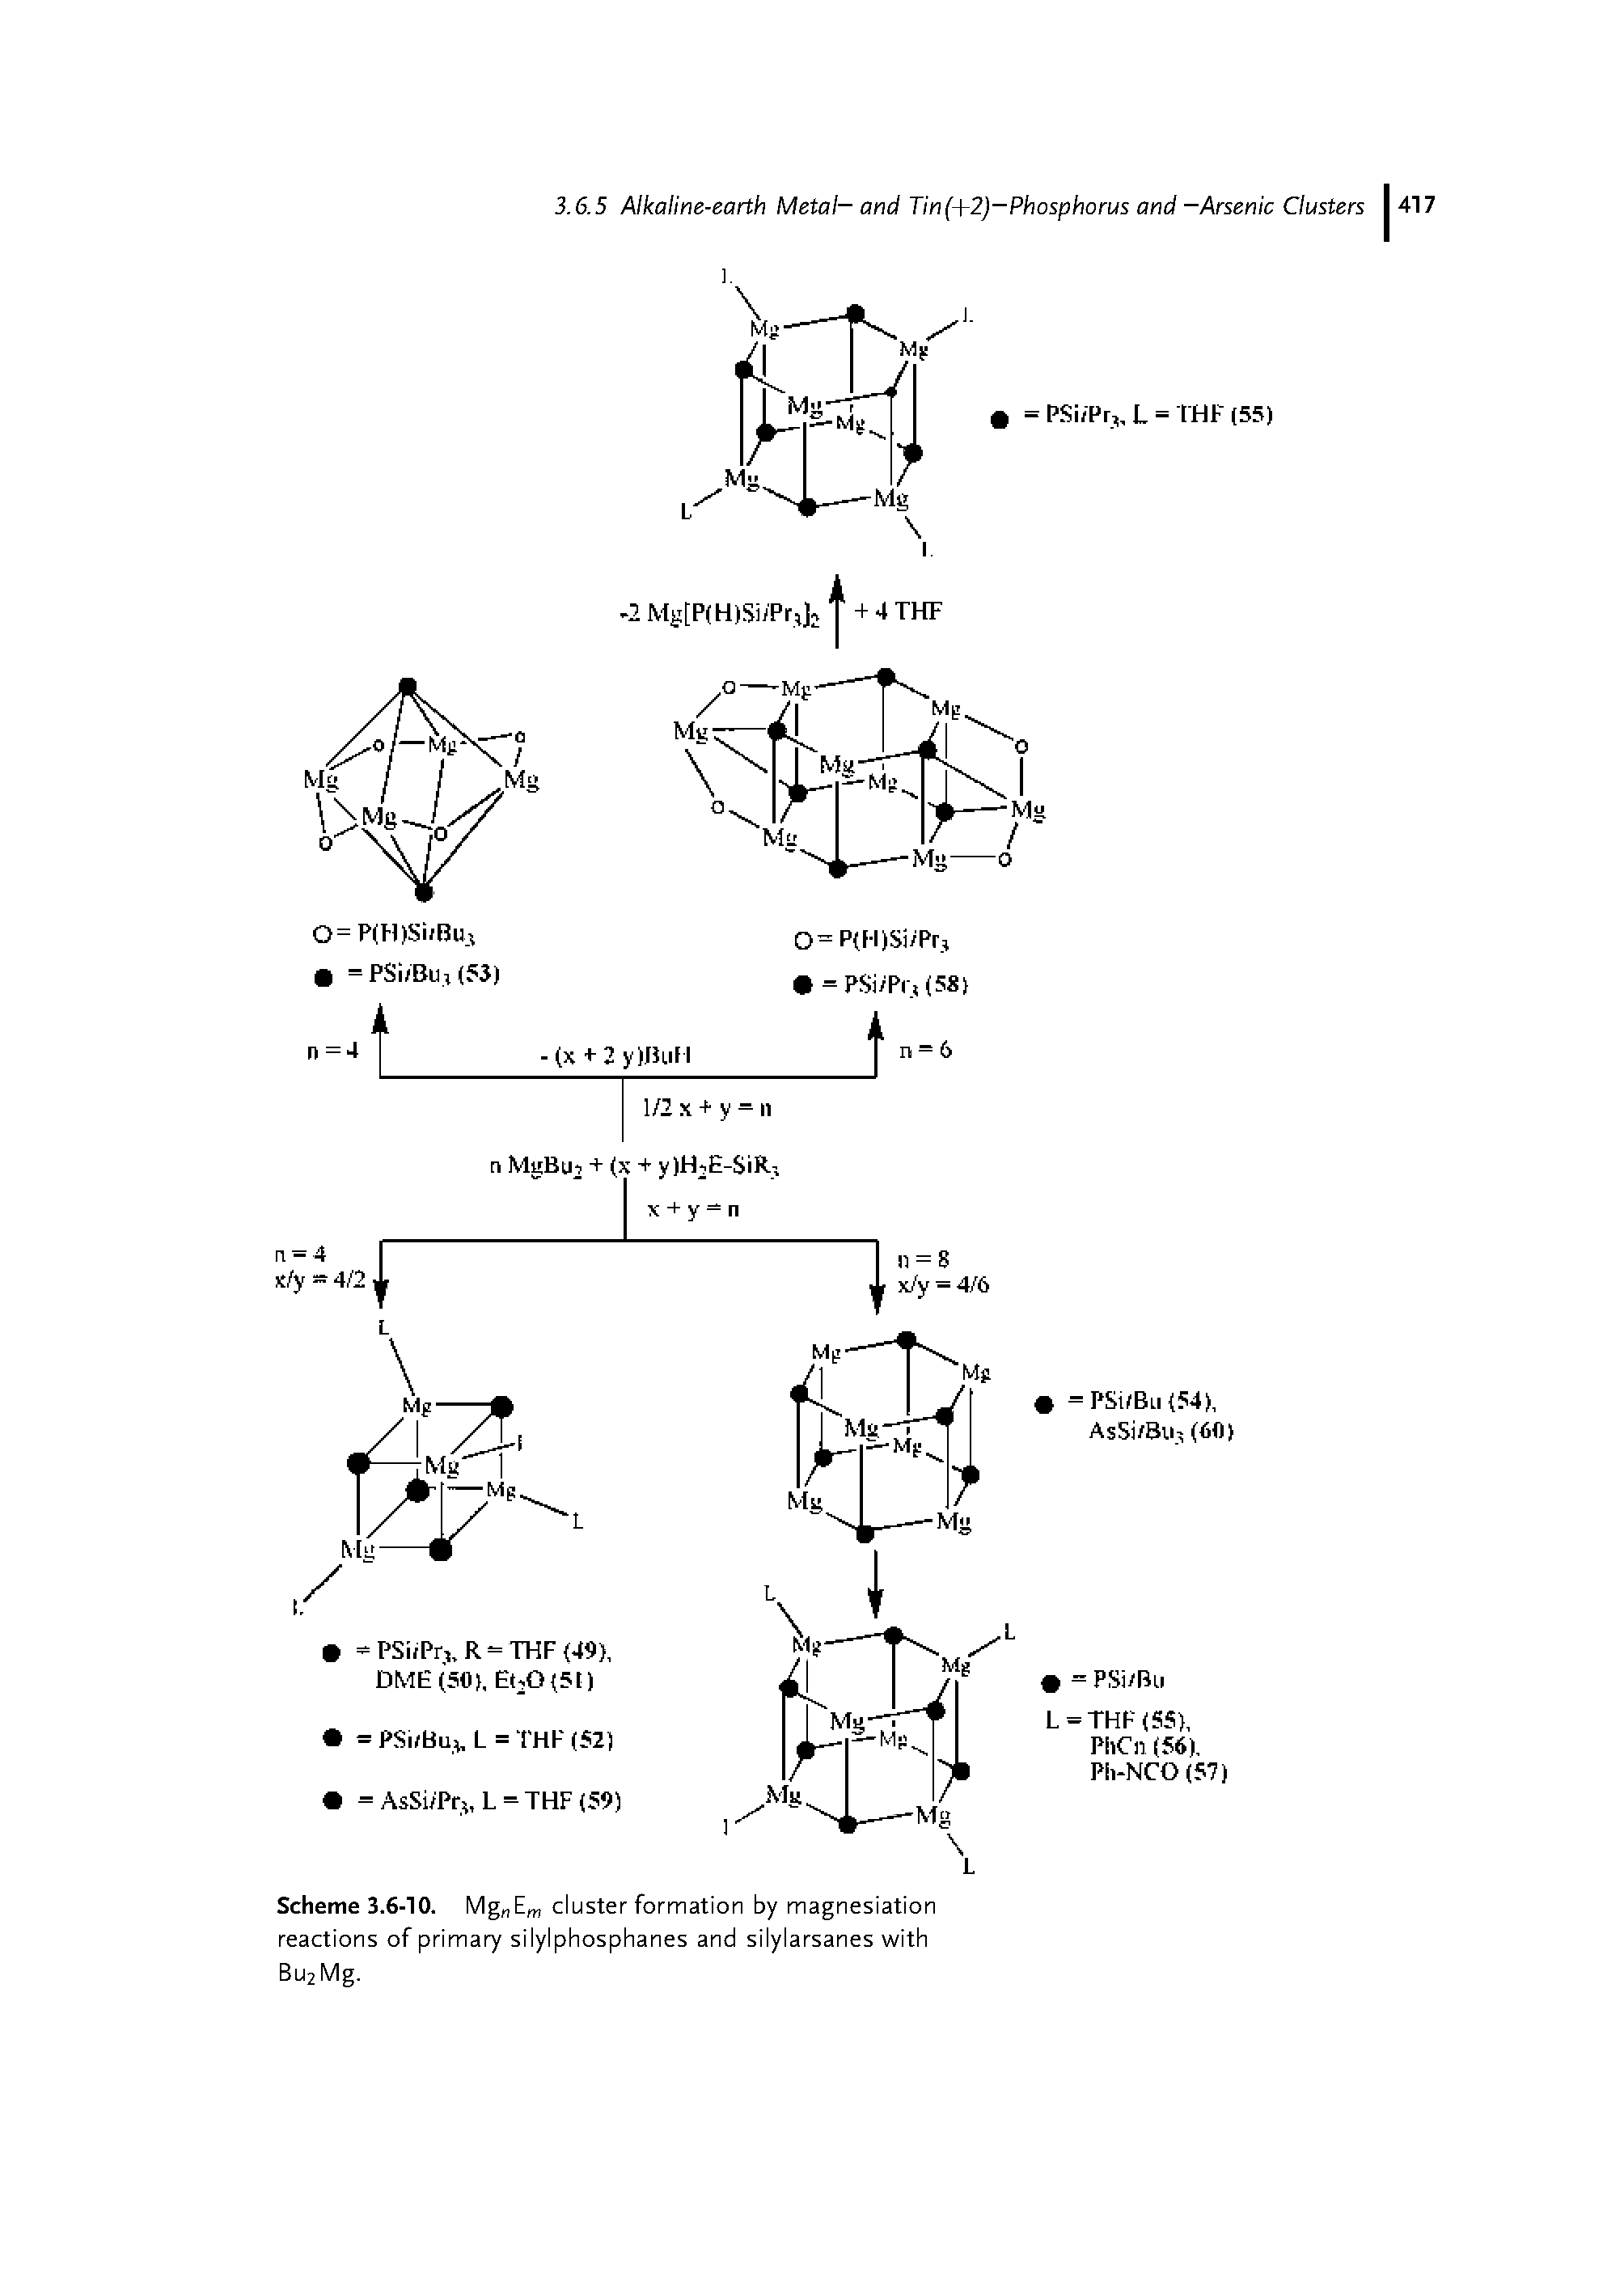 Scheme 3.6-10. Mg Em cluster formation by magnesiation reactions of primary silylphosphanes and silylarsanes with Bu2 Mg.